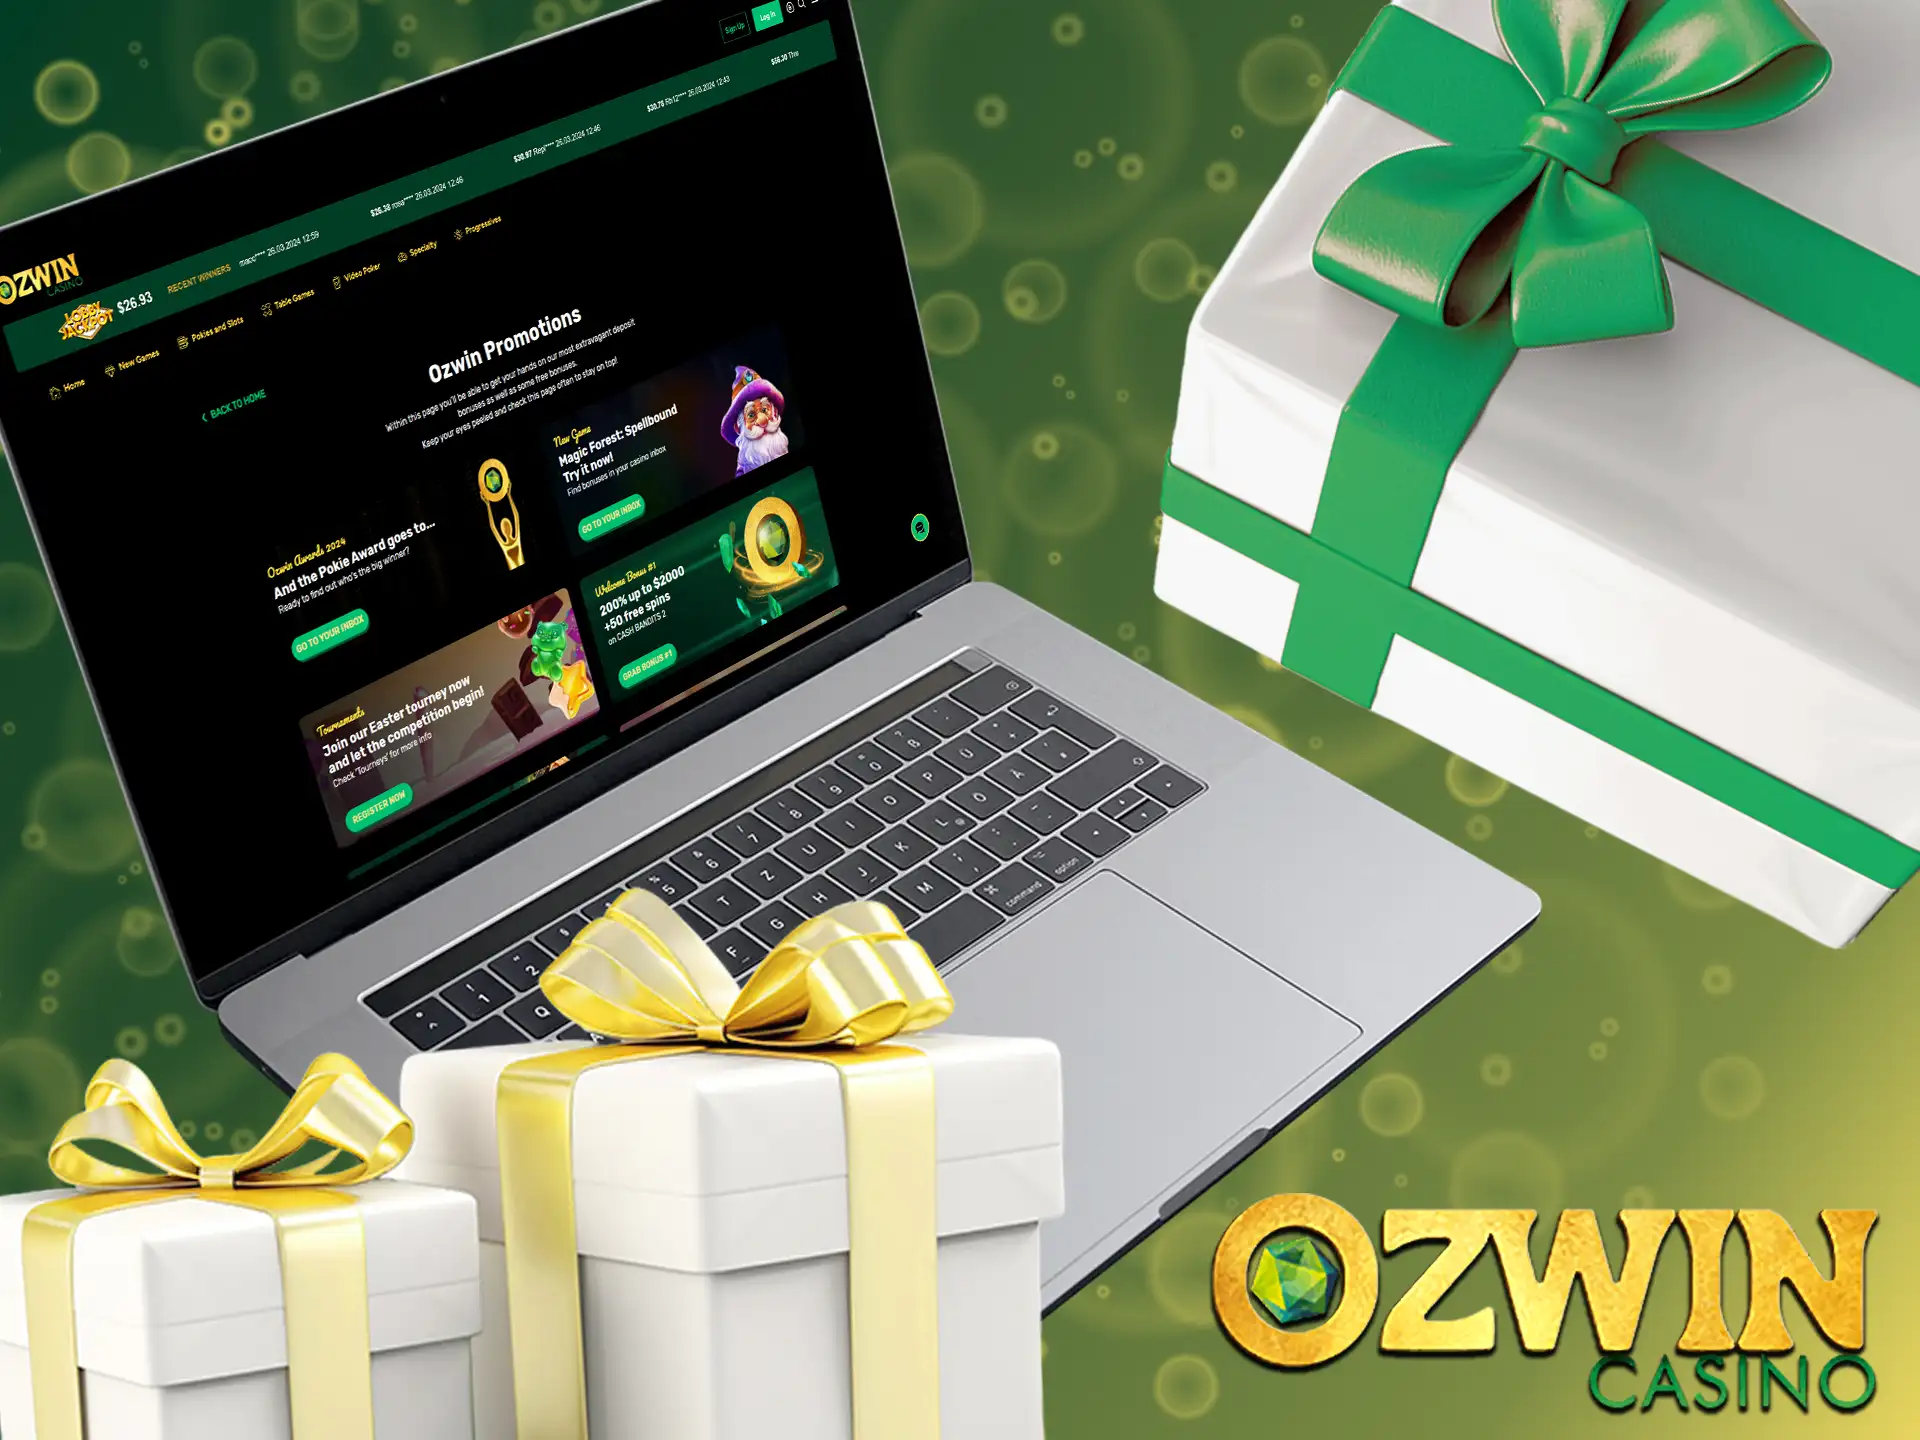 New customers at Ozwin can claim a generous welcome bonus!